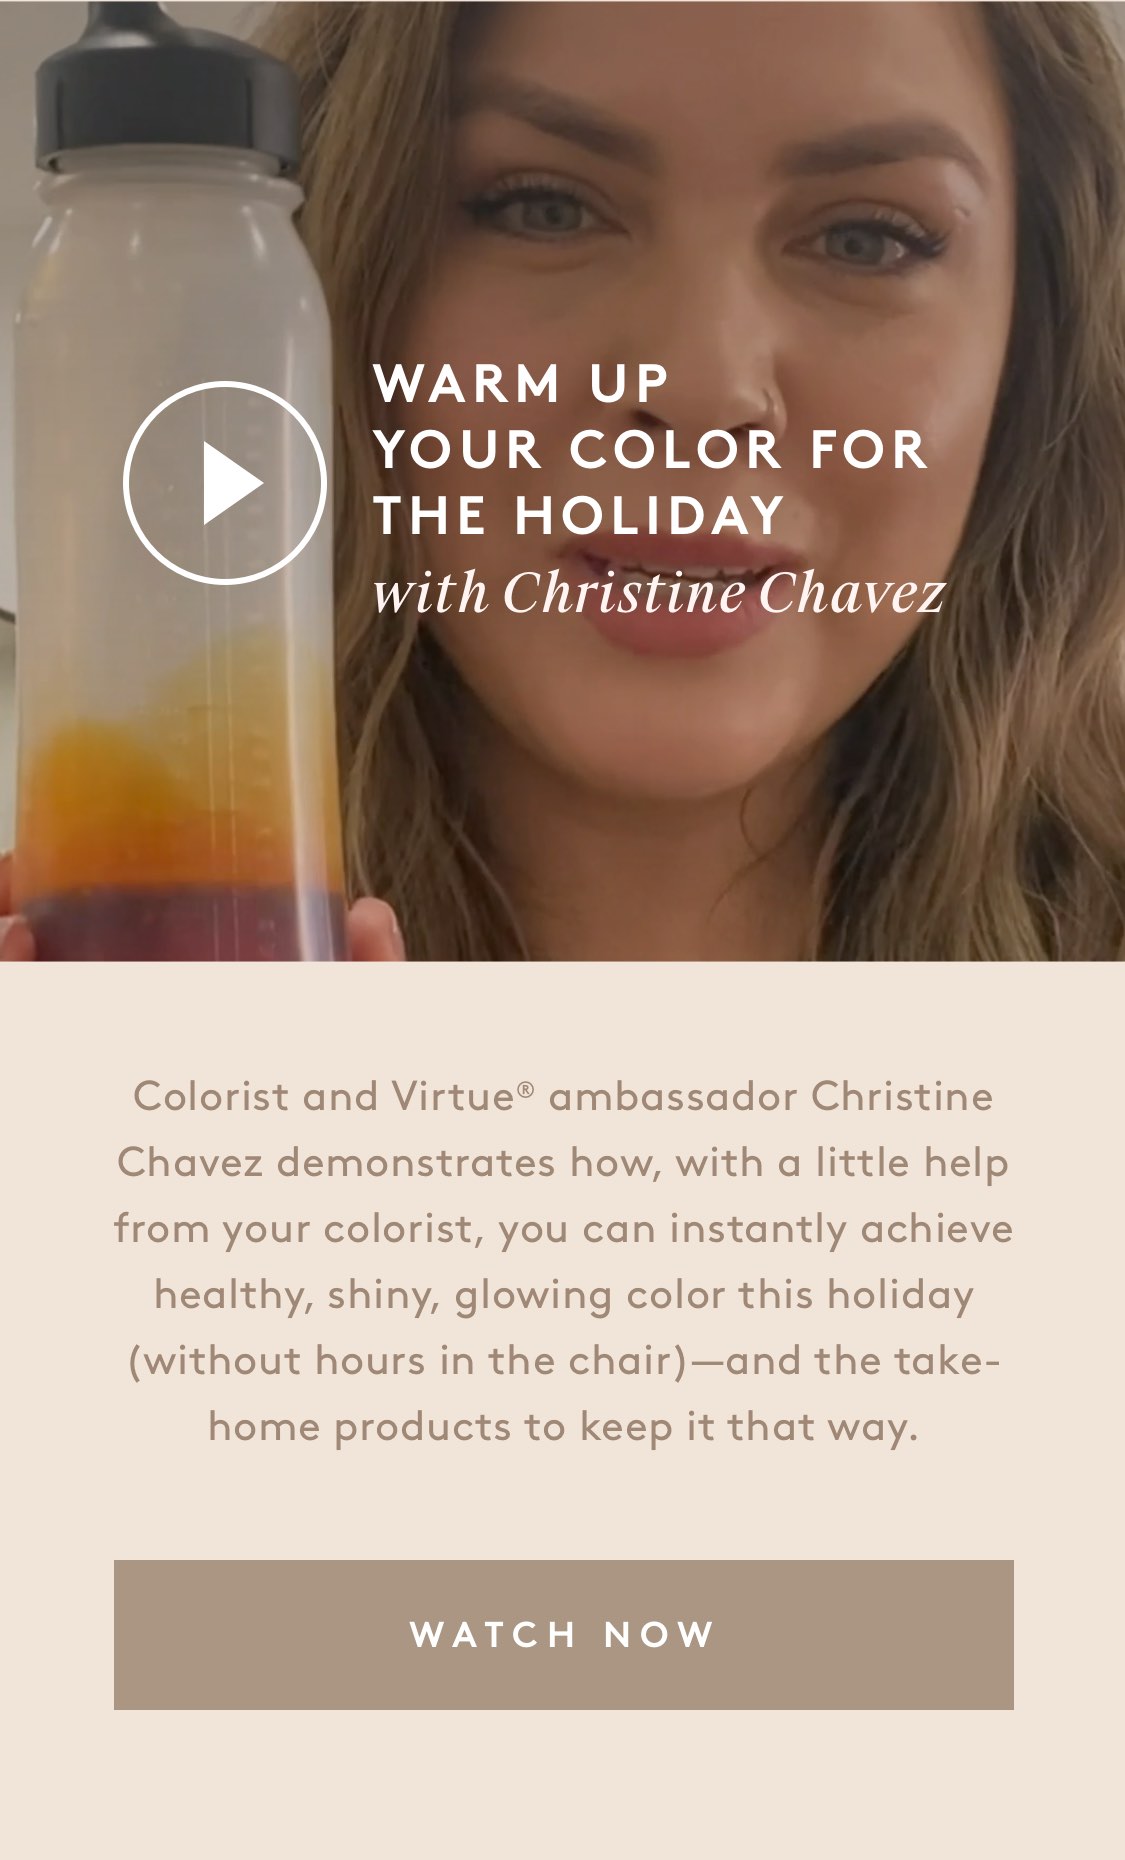 Warm Up Your Color For The Holiday With Christine Chavez